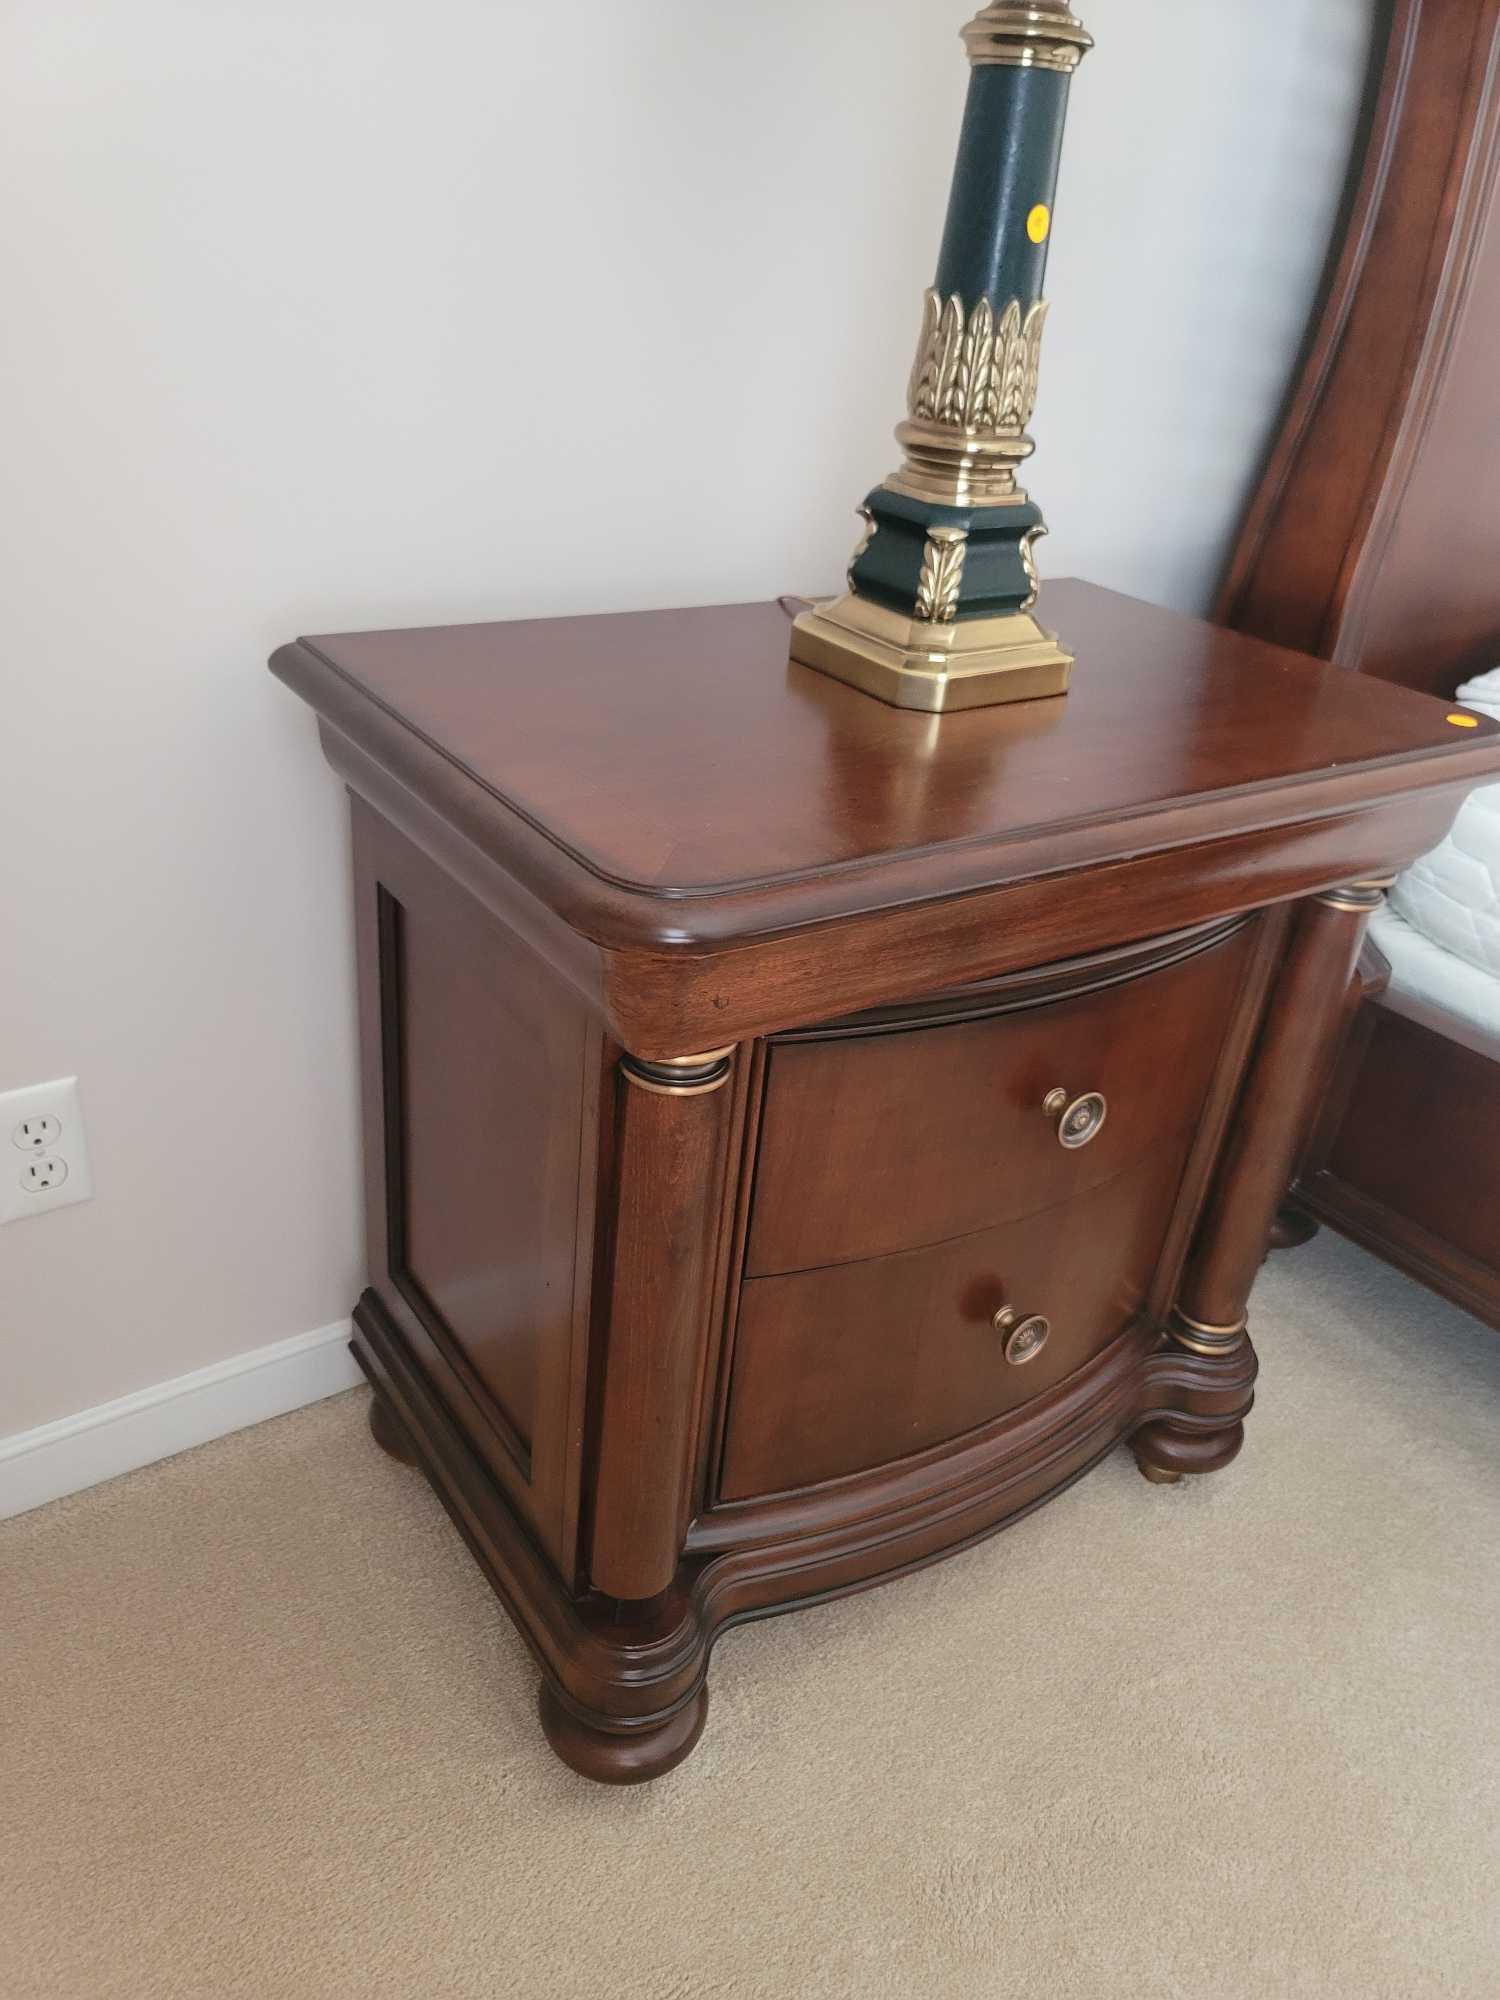 (MBR) DREXEL 2 DRAWER NIGHTSTAND. BRASS TONE DETAILING WITH BRASS TONE KNOBS. MEASURES APPROX 31" X